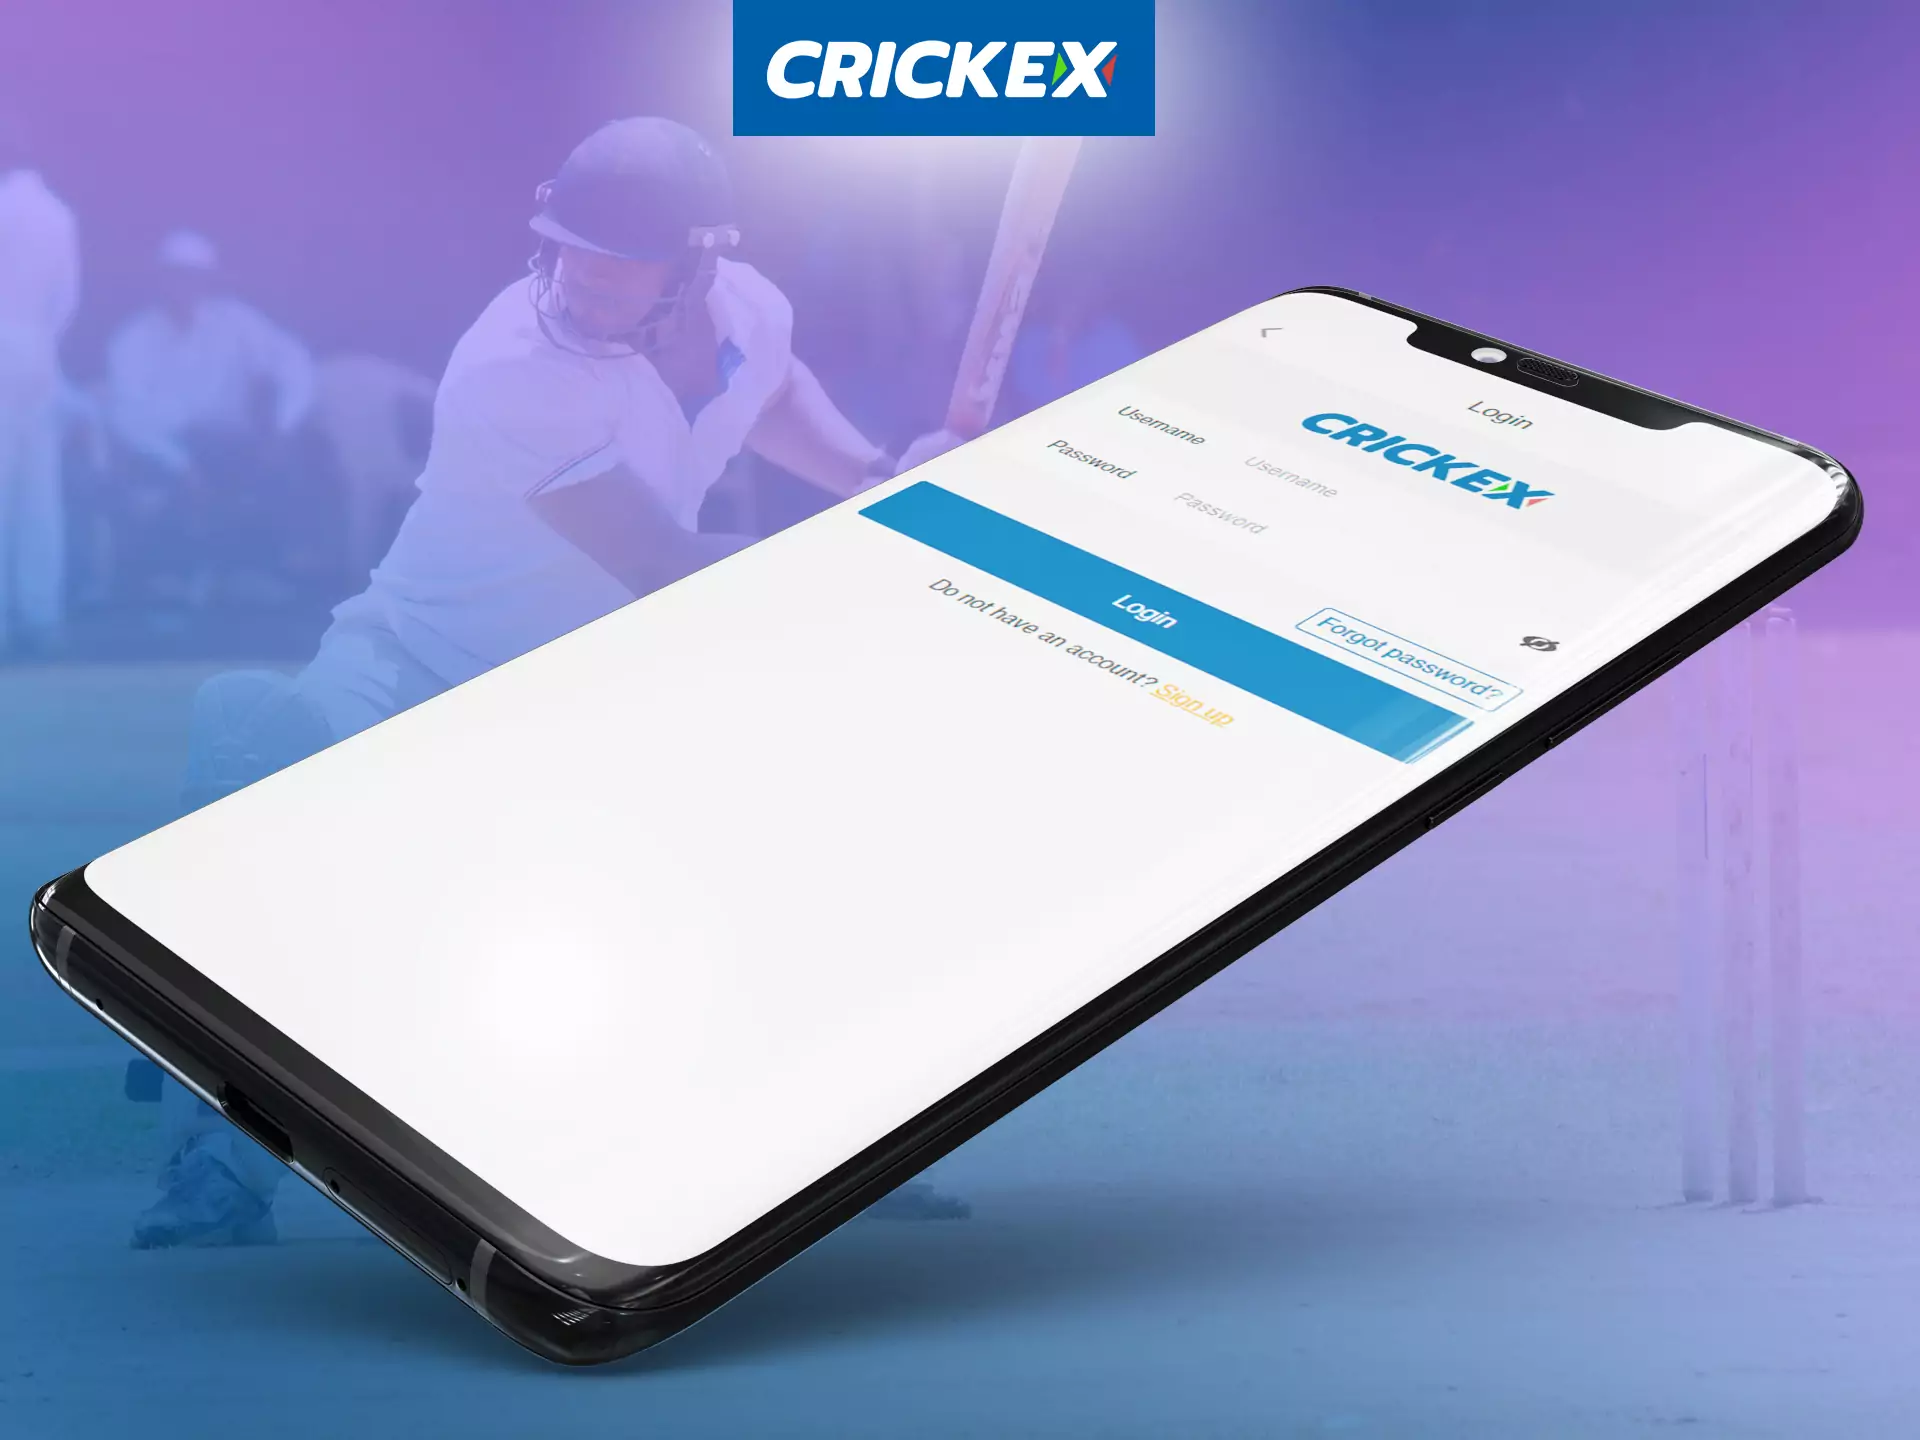 Login to your Crickex app account to use all the features and benefits.